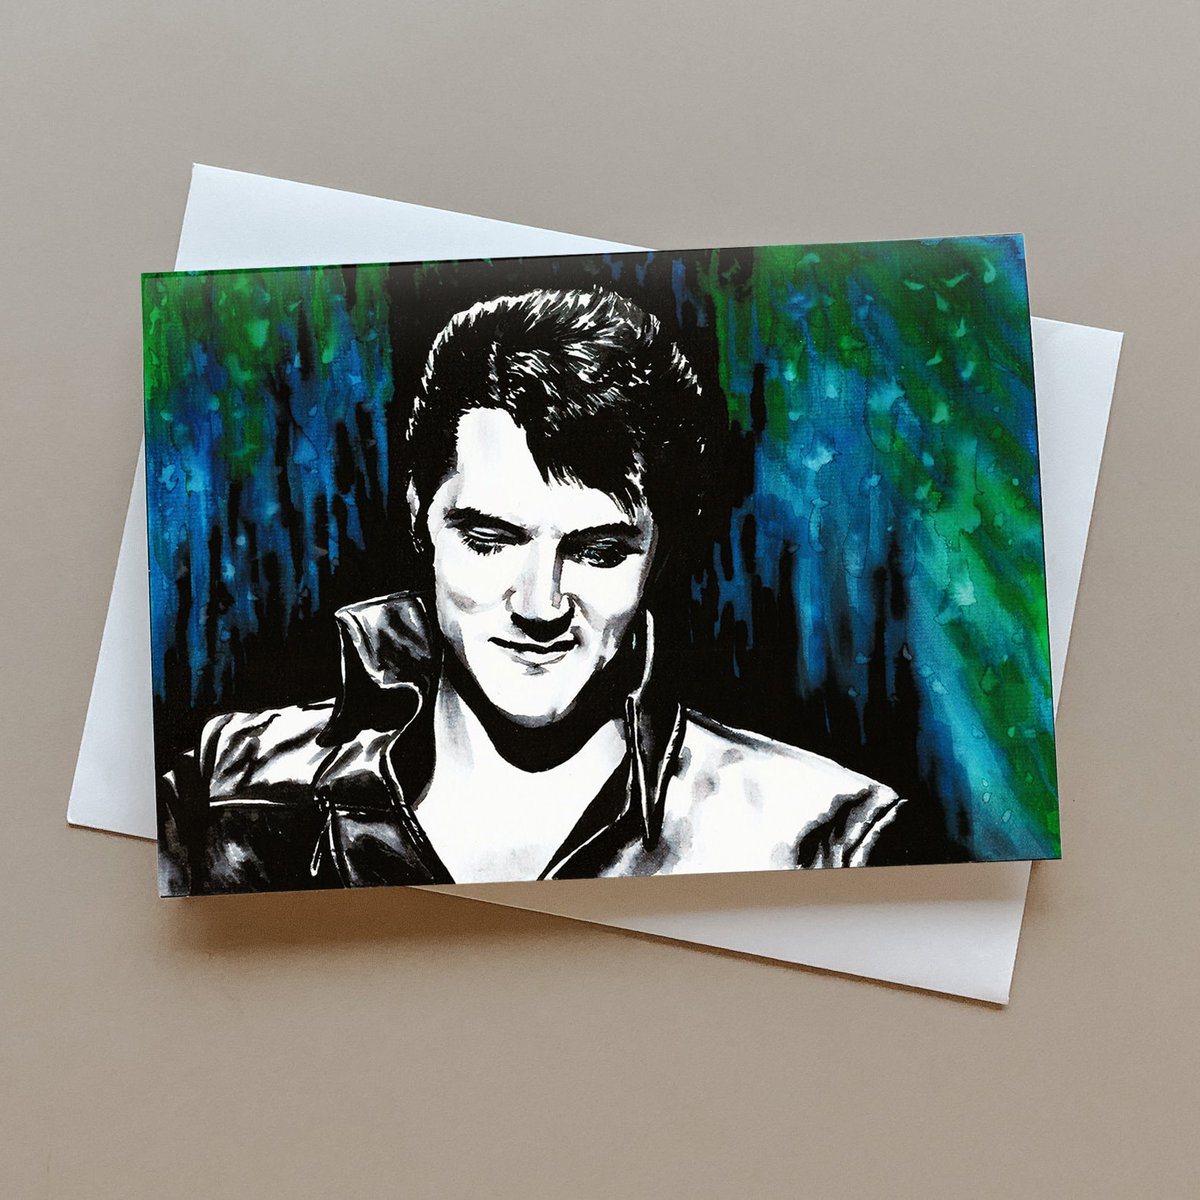 Elvis Presley greeting card, King of Rock and Roll, Rock Music card, Elvis birthday card, Gift for Elvis fans, personalised card, Elvis card tuppu.net/7cb6b3e5 #Artwork #GiftIdeas #GreetingCards #PersonalisedCard